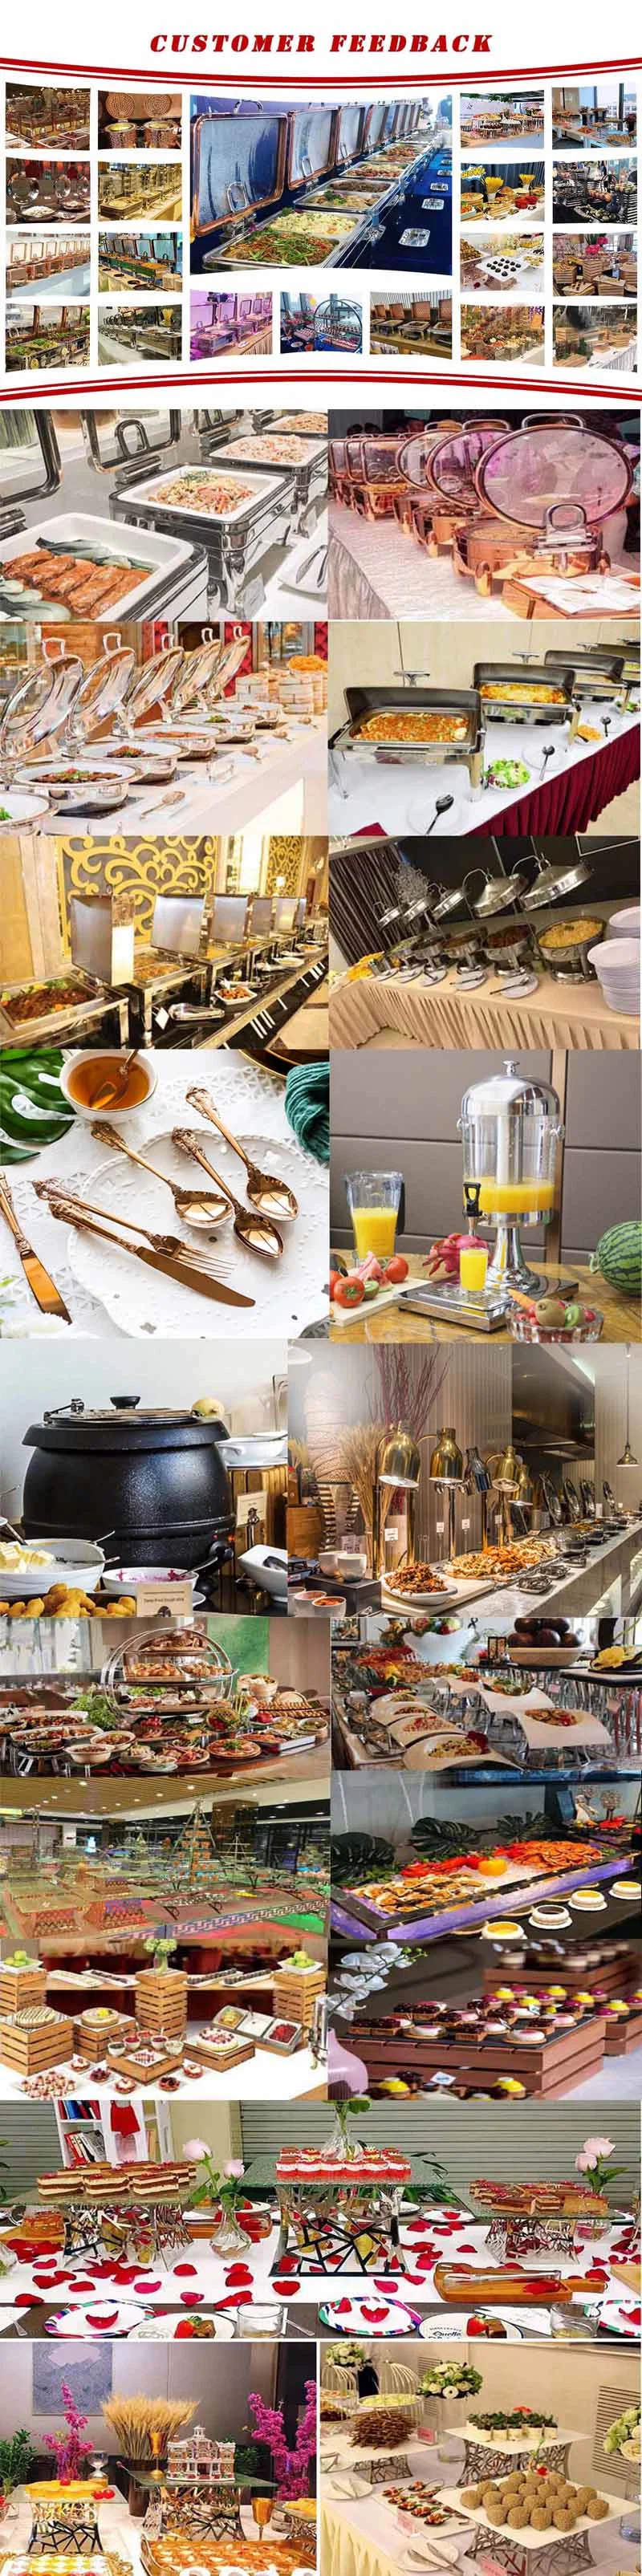 Other Hotel Supplier Good Quality Wholesale Kitchen Utensils Silver and Gold Stainless Steel Soup Warmer Station Tureen Swan Ceramic Soup Ladle Set